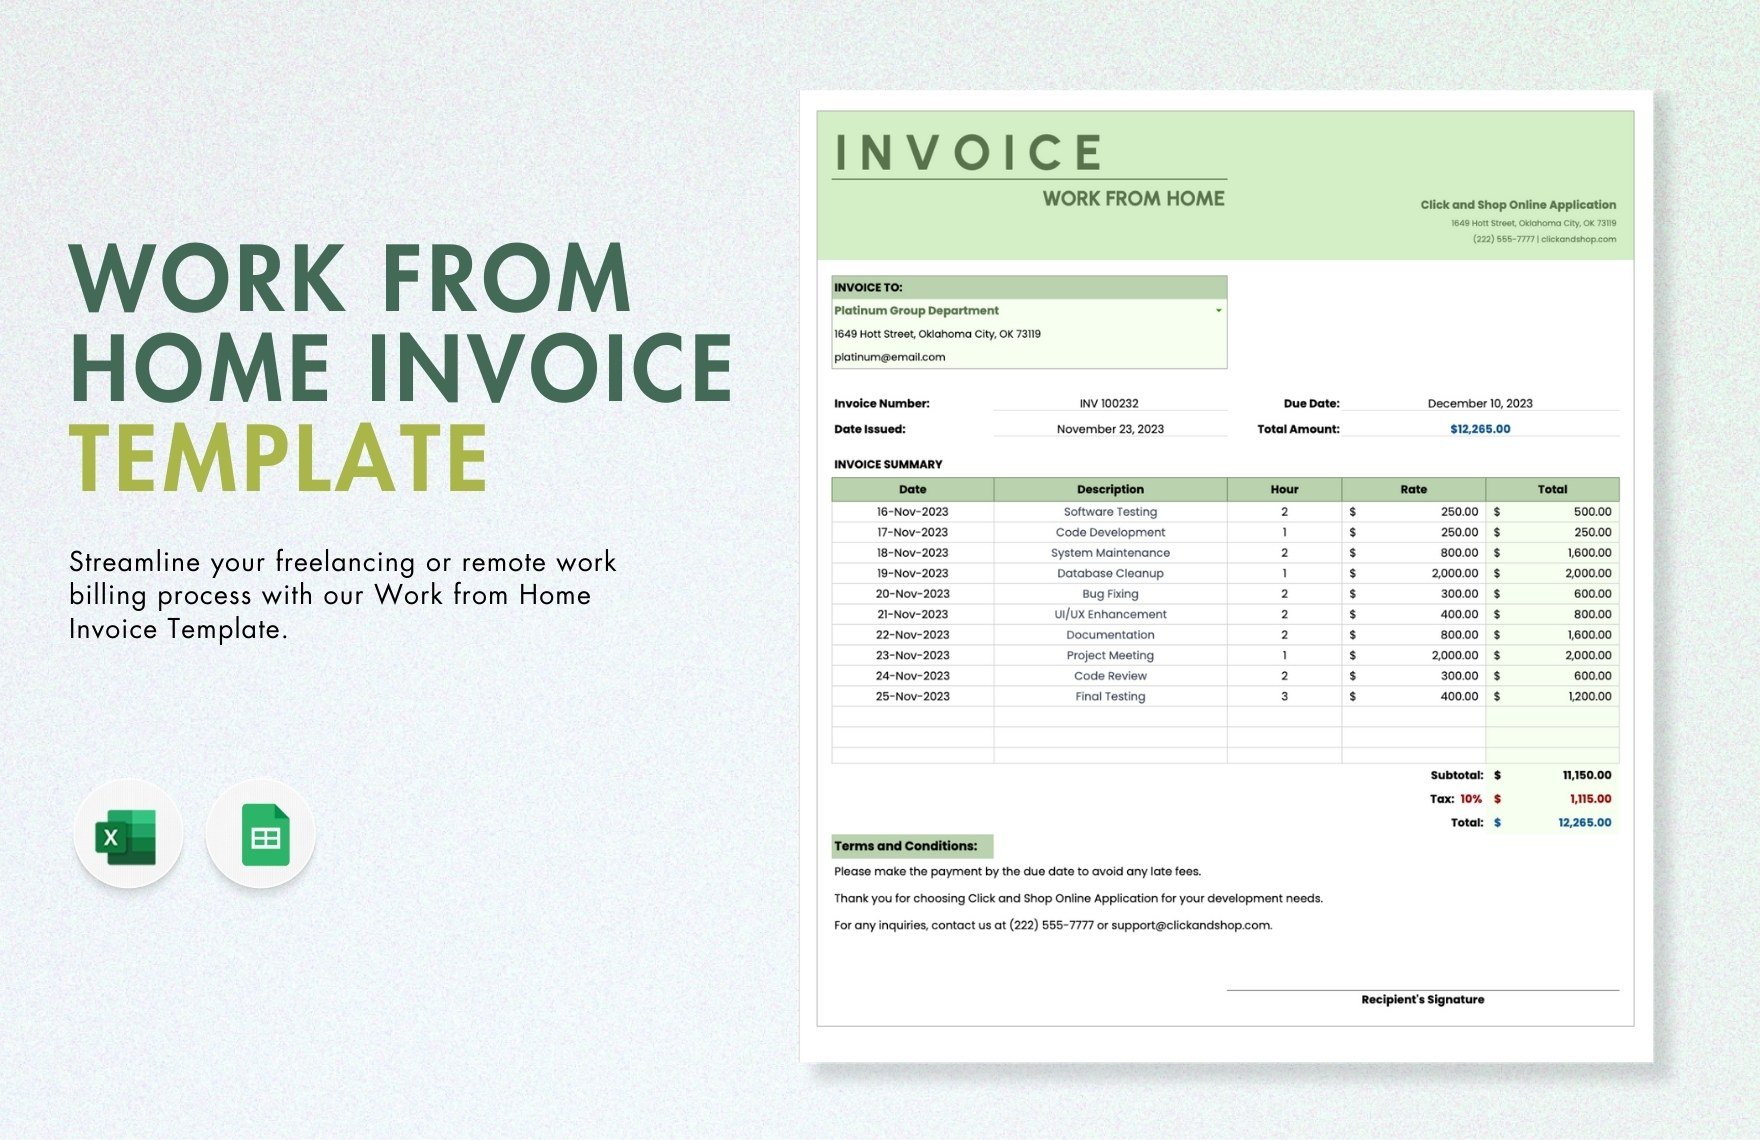 Work from Home Invoice Template